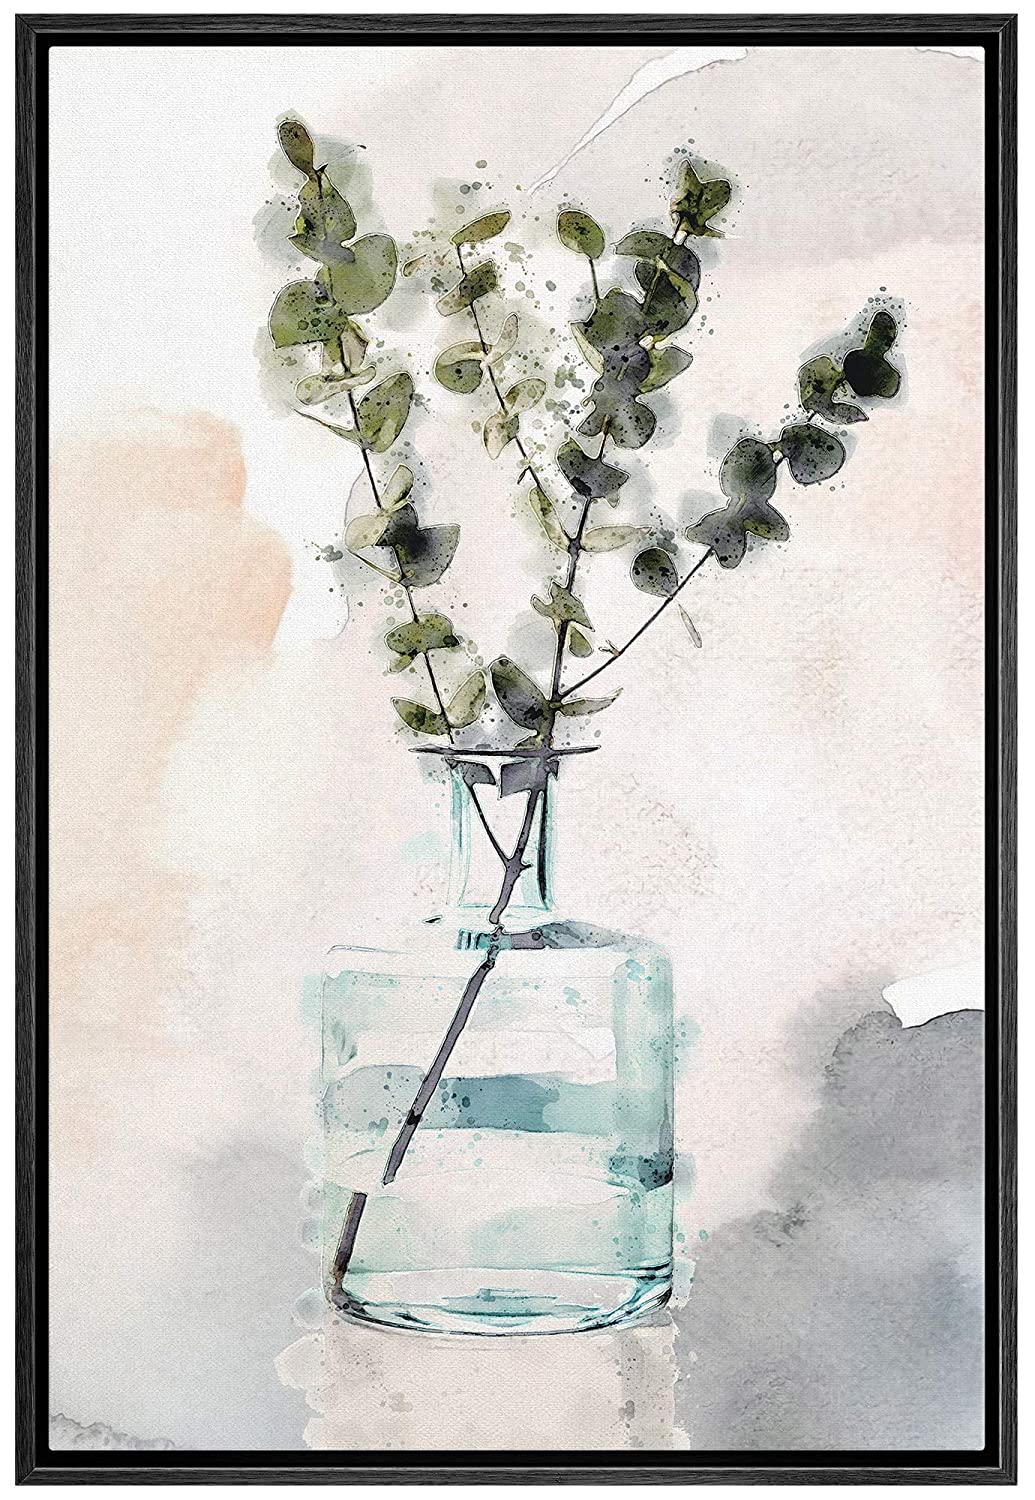 wall26 Framed Canvas Wall Art Dark Green Eucalyptus Tree in a Glass Vase Botanical Plants Watercolor Abstract Modern Relax/Calm Pastel for Living Room, Bedroom, Office - 24x36 inches - image 1 of 4